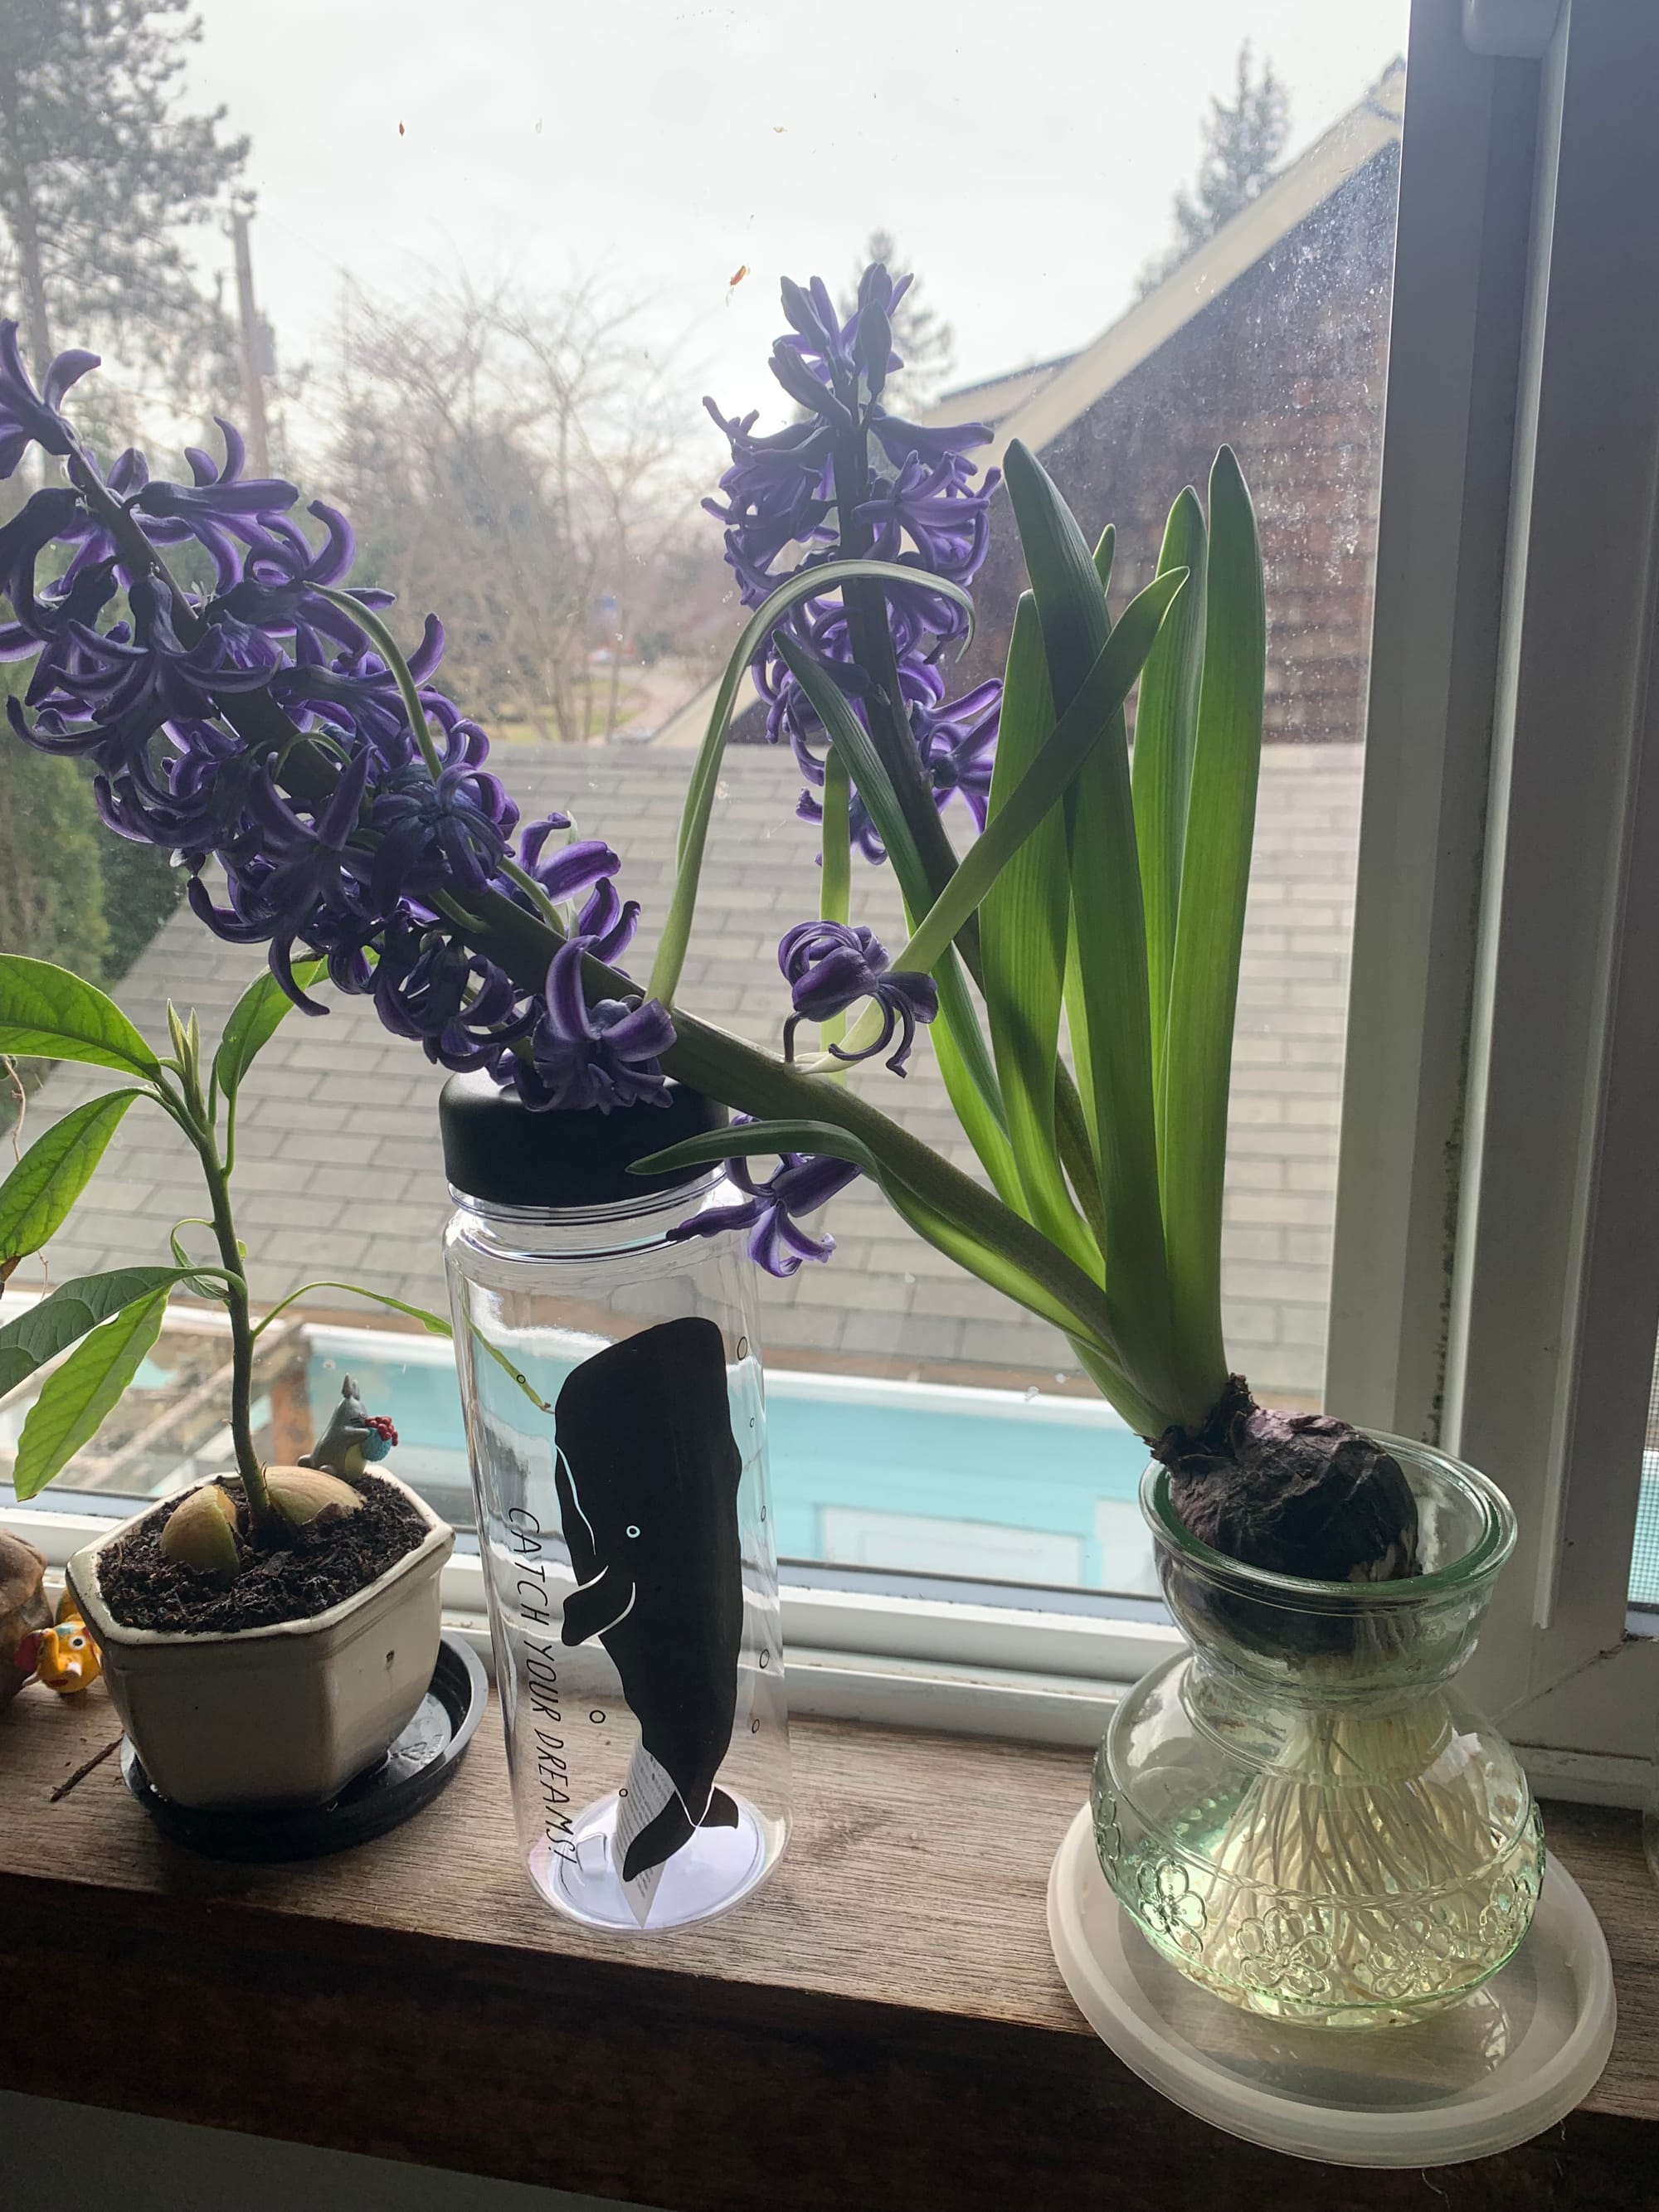 blooming purple hyacinth in a glass vase, leaning against a plastic bottle with a black whale on it, bottle says "catch your dreams," next to a small avocado plant, on a windowsill